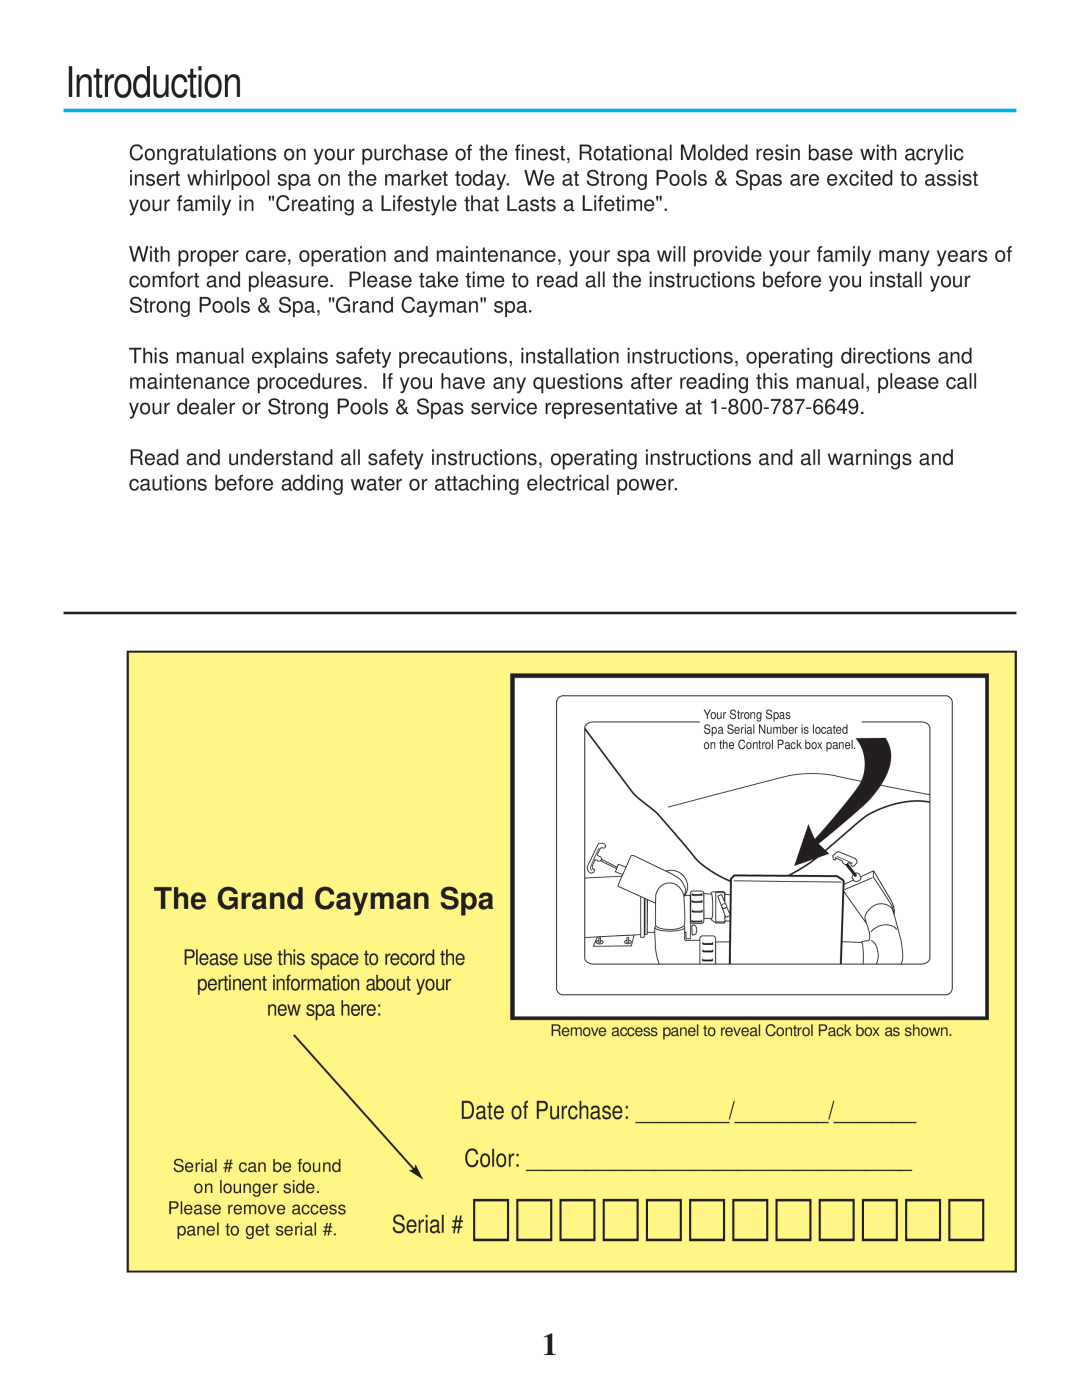 Strong Pools and Spas owner manual Introduction, Color Serial #, Date of Purchase, The Grand Cayman Spa 